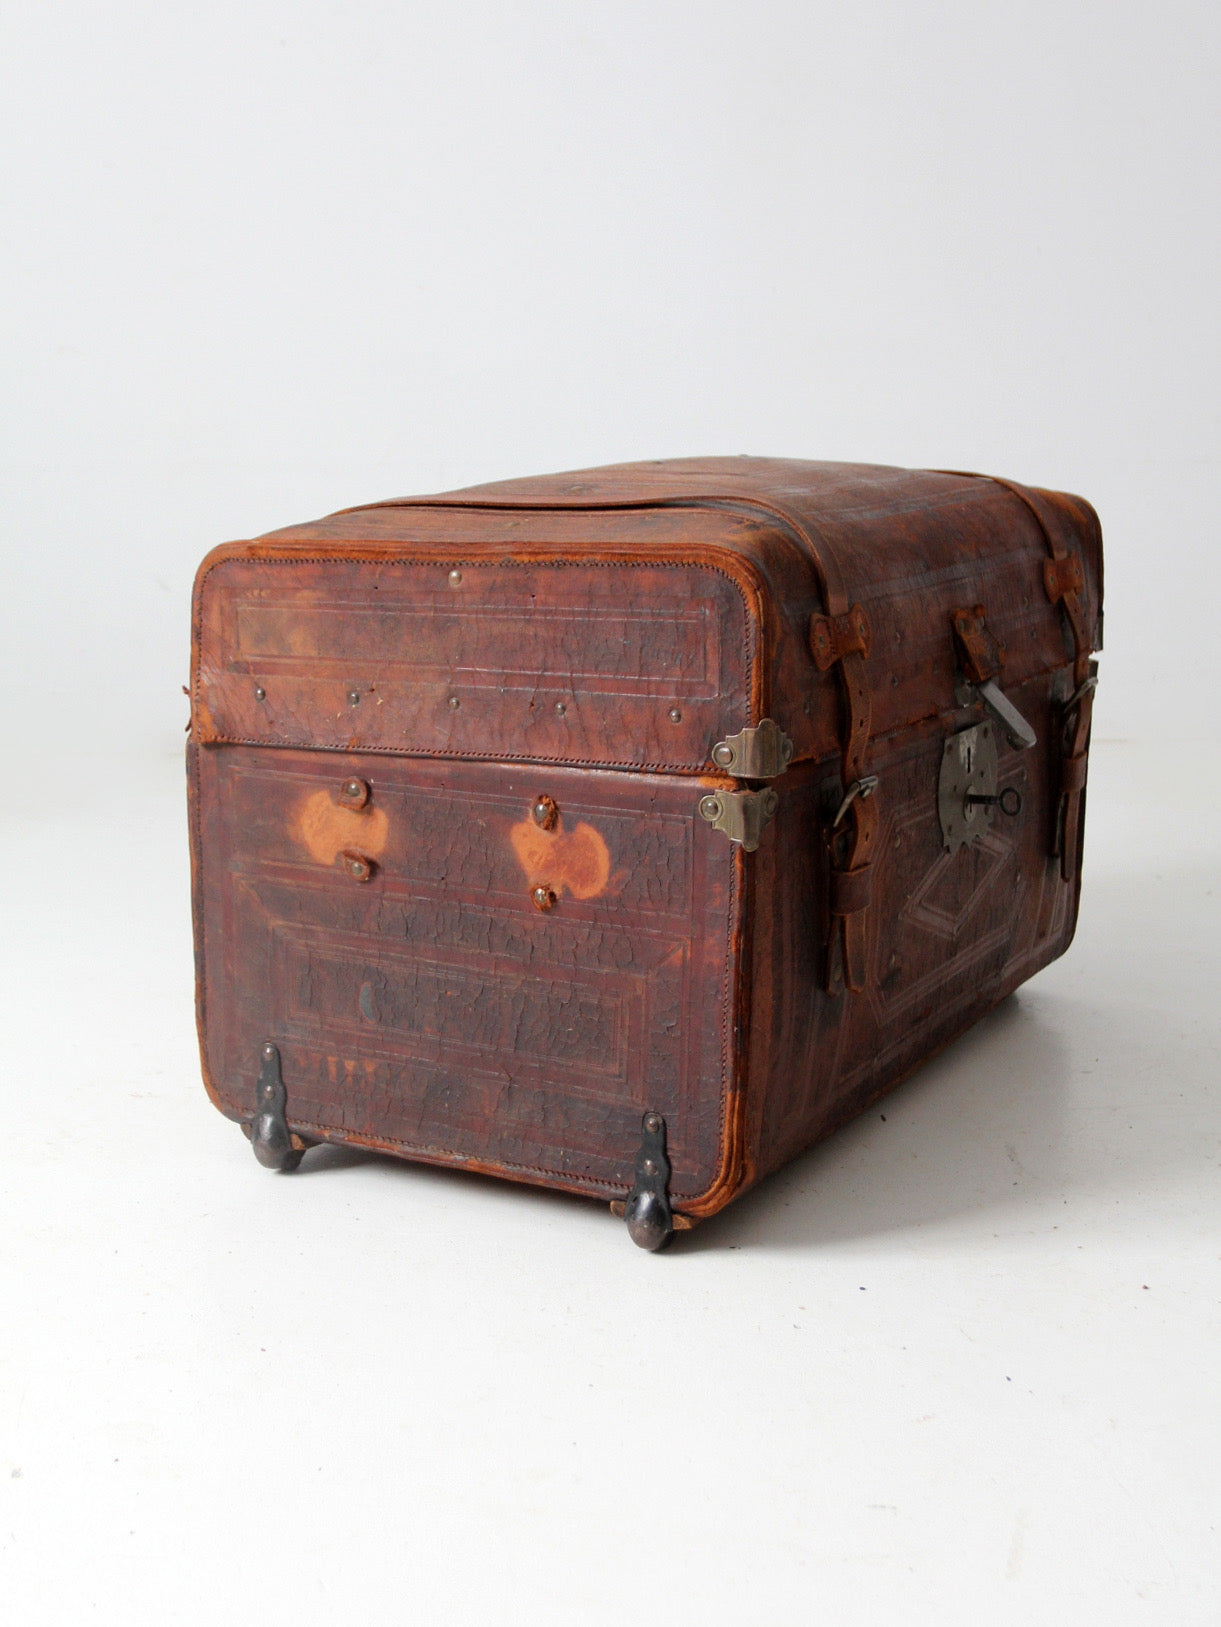 Vintage Trunk Leather Handle Natural Tanned Vachetta Leather Color